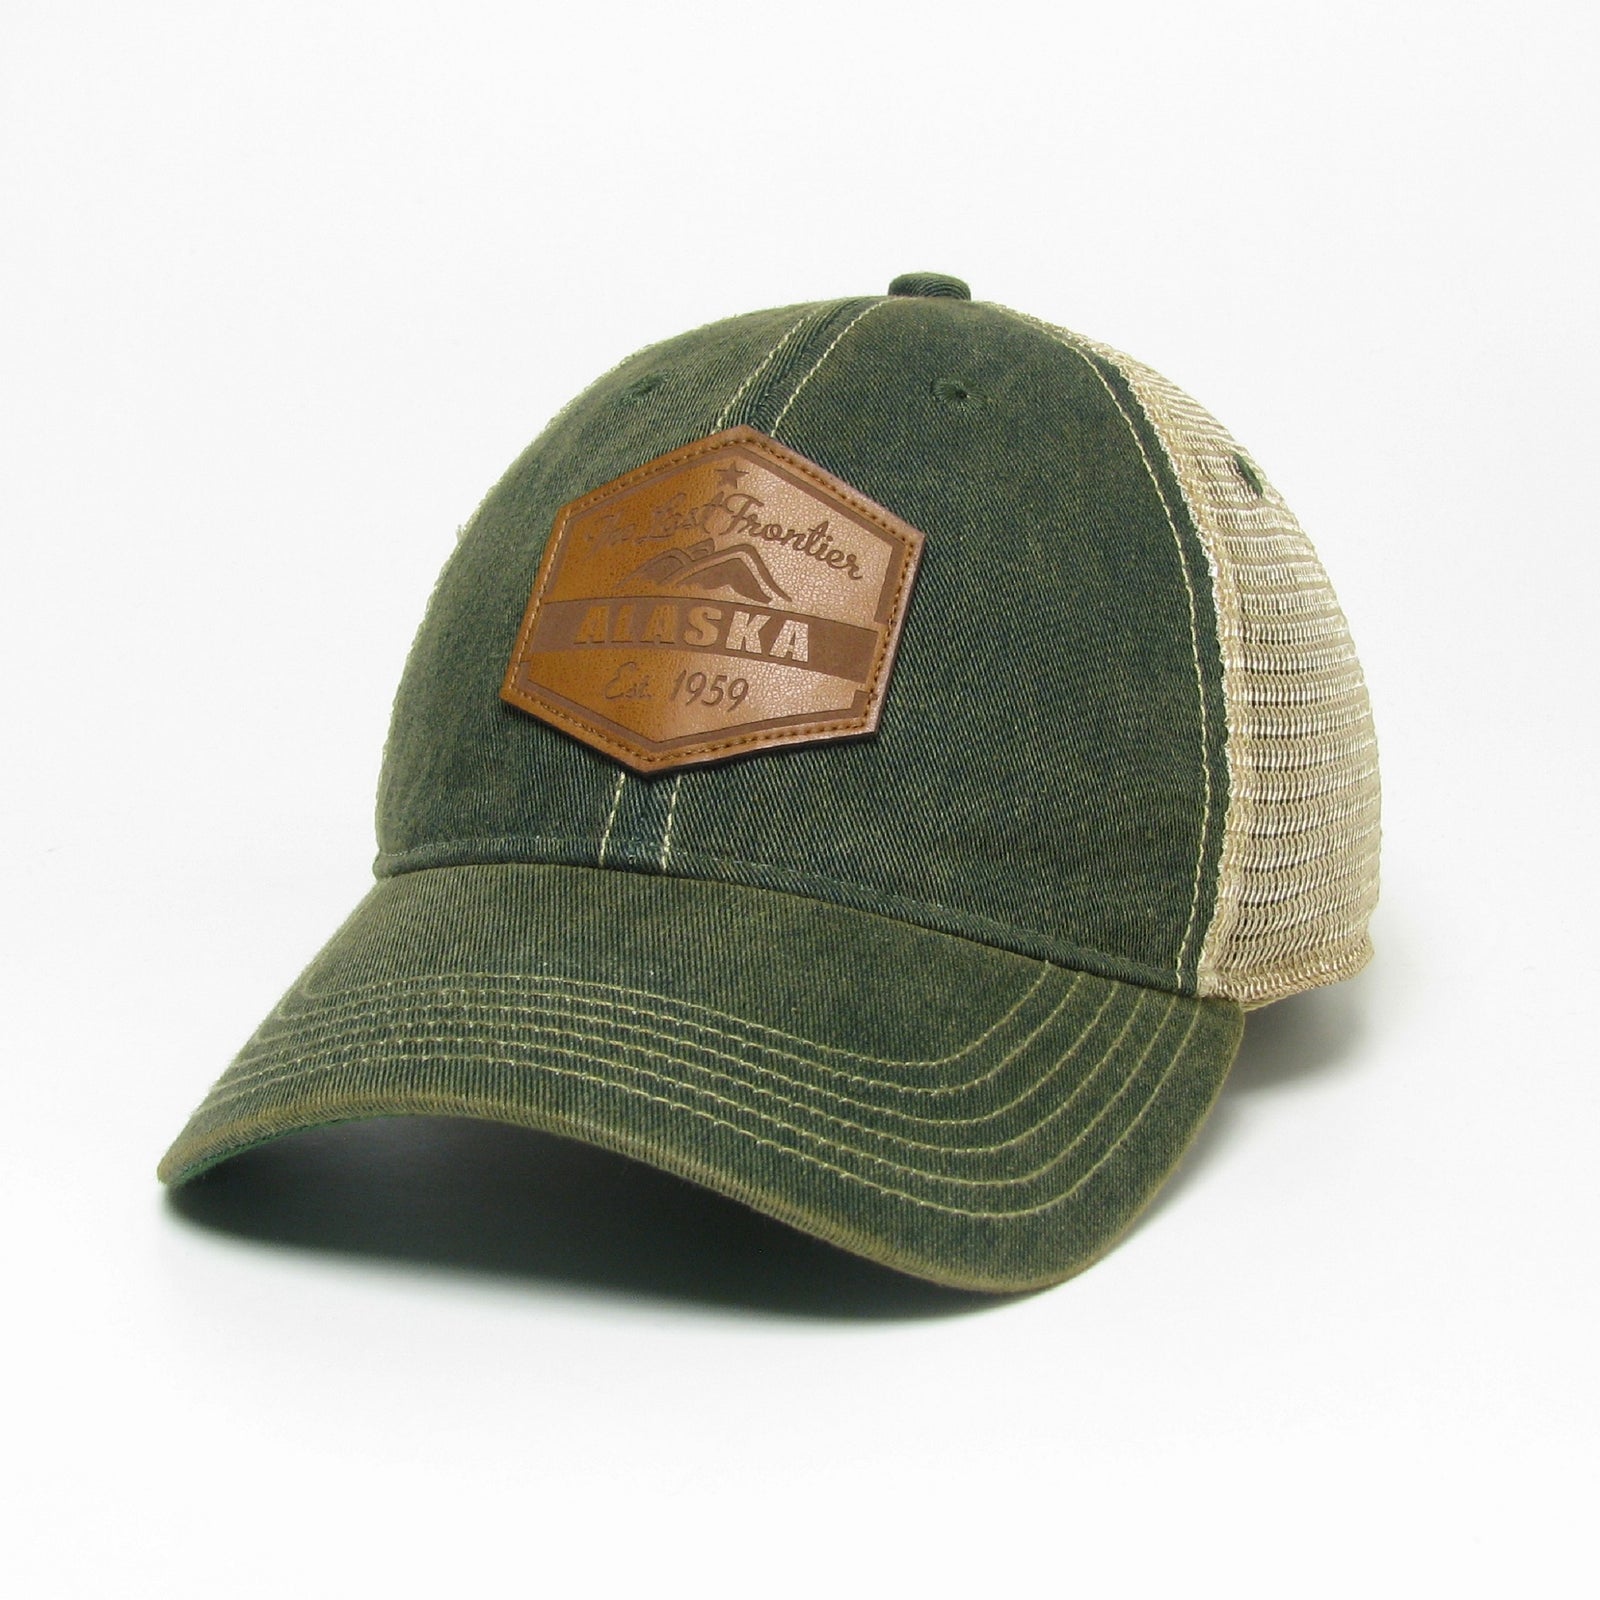 Alaska Mountain Sunset Trucker Hat - Forests, Tides, and Treasures